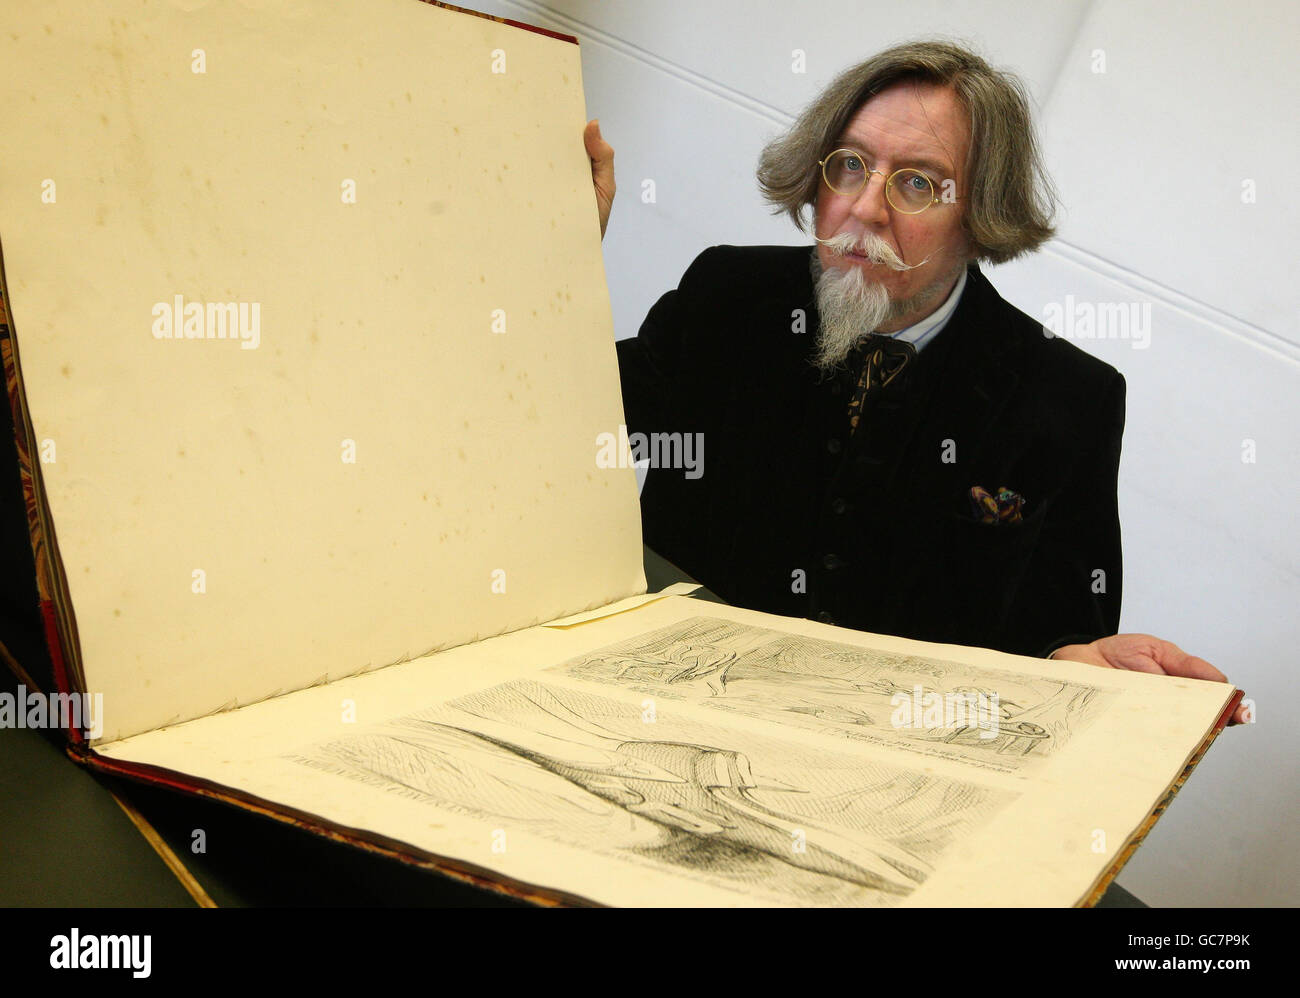 Stephen Calloway, Curator of Prints in the Word and Image Department of the Victoria and Albert Museum, London, examines a book of cartoons by British caricaturist James Gillray, which were originally censored in the 19th century, and lay hidden in government archives for over 100 years. Stock Photo